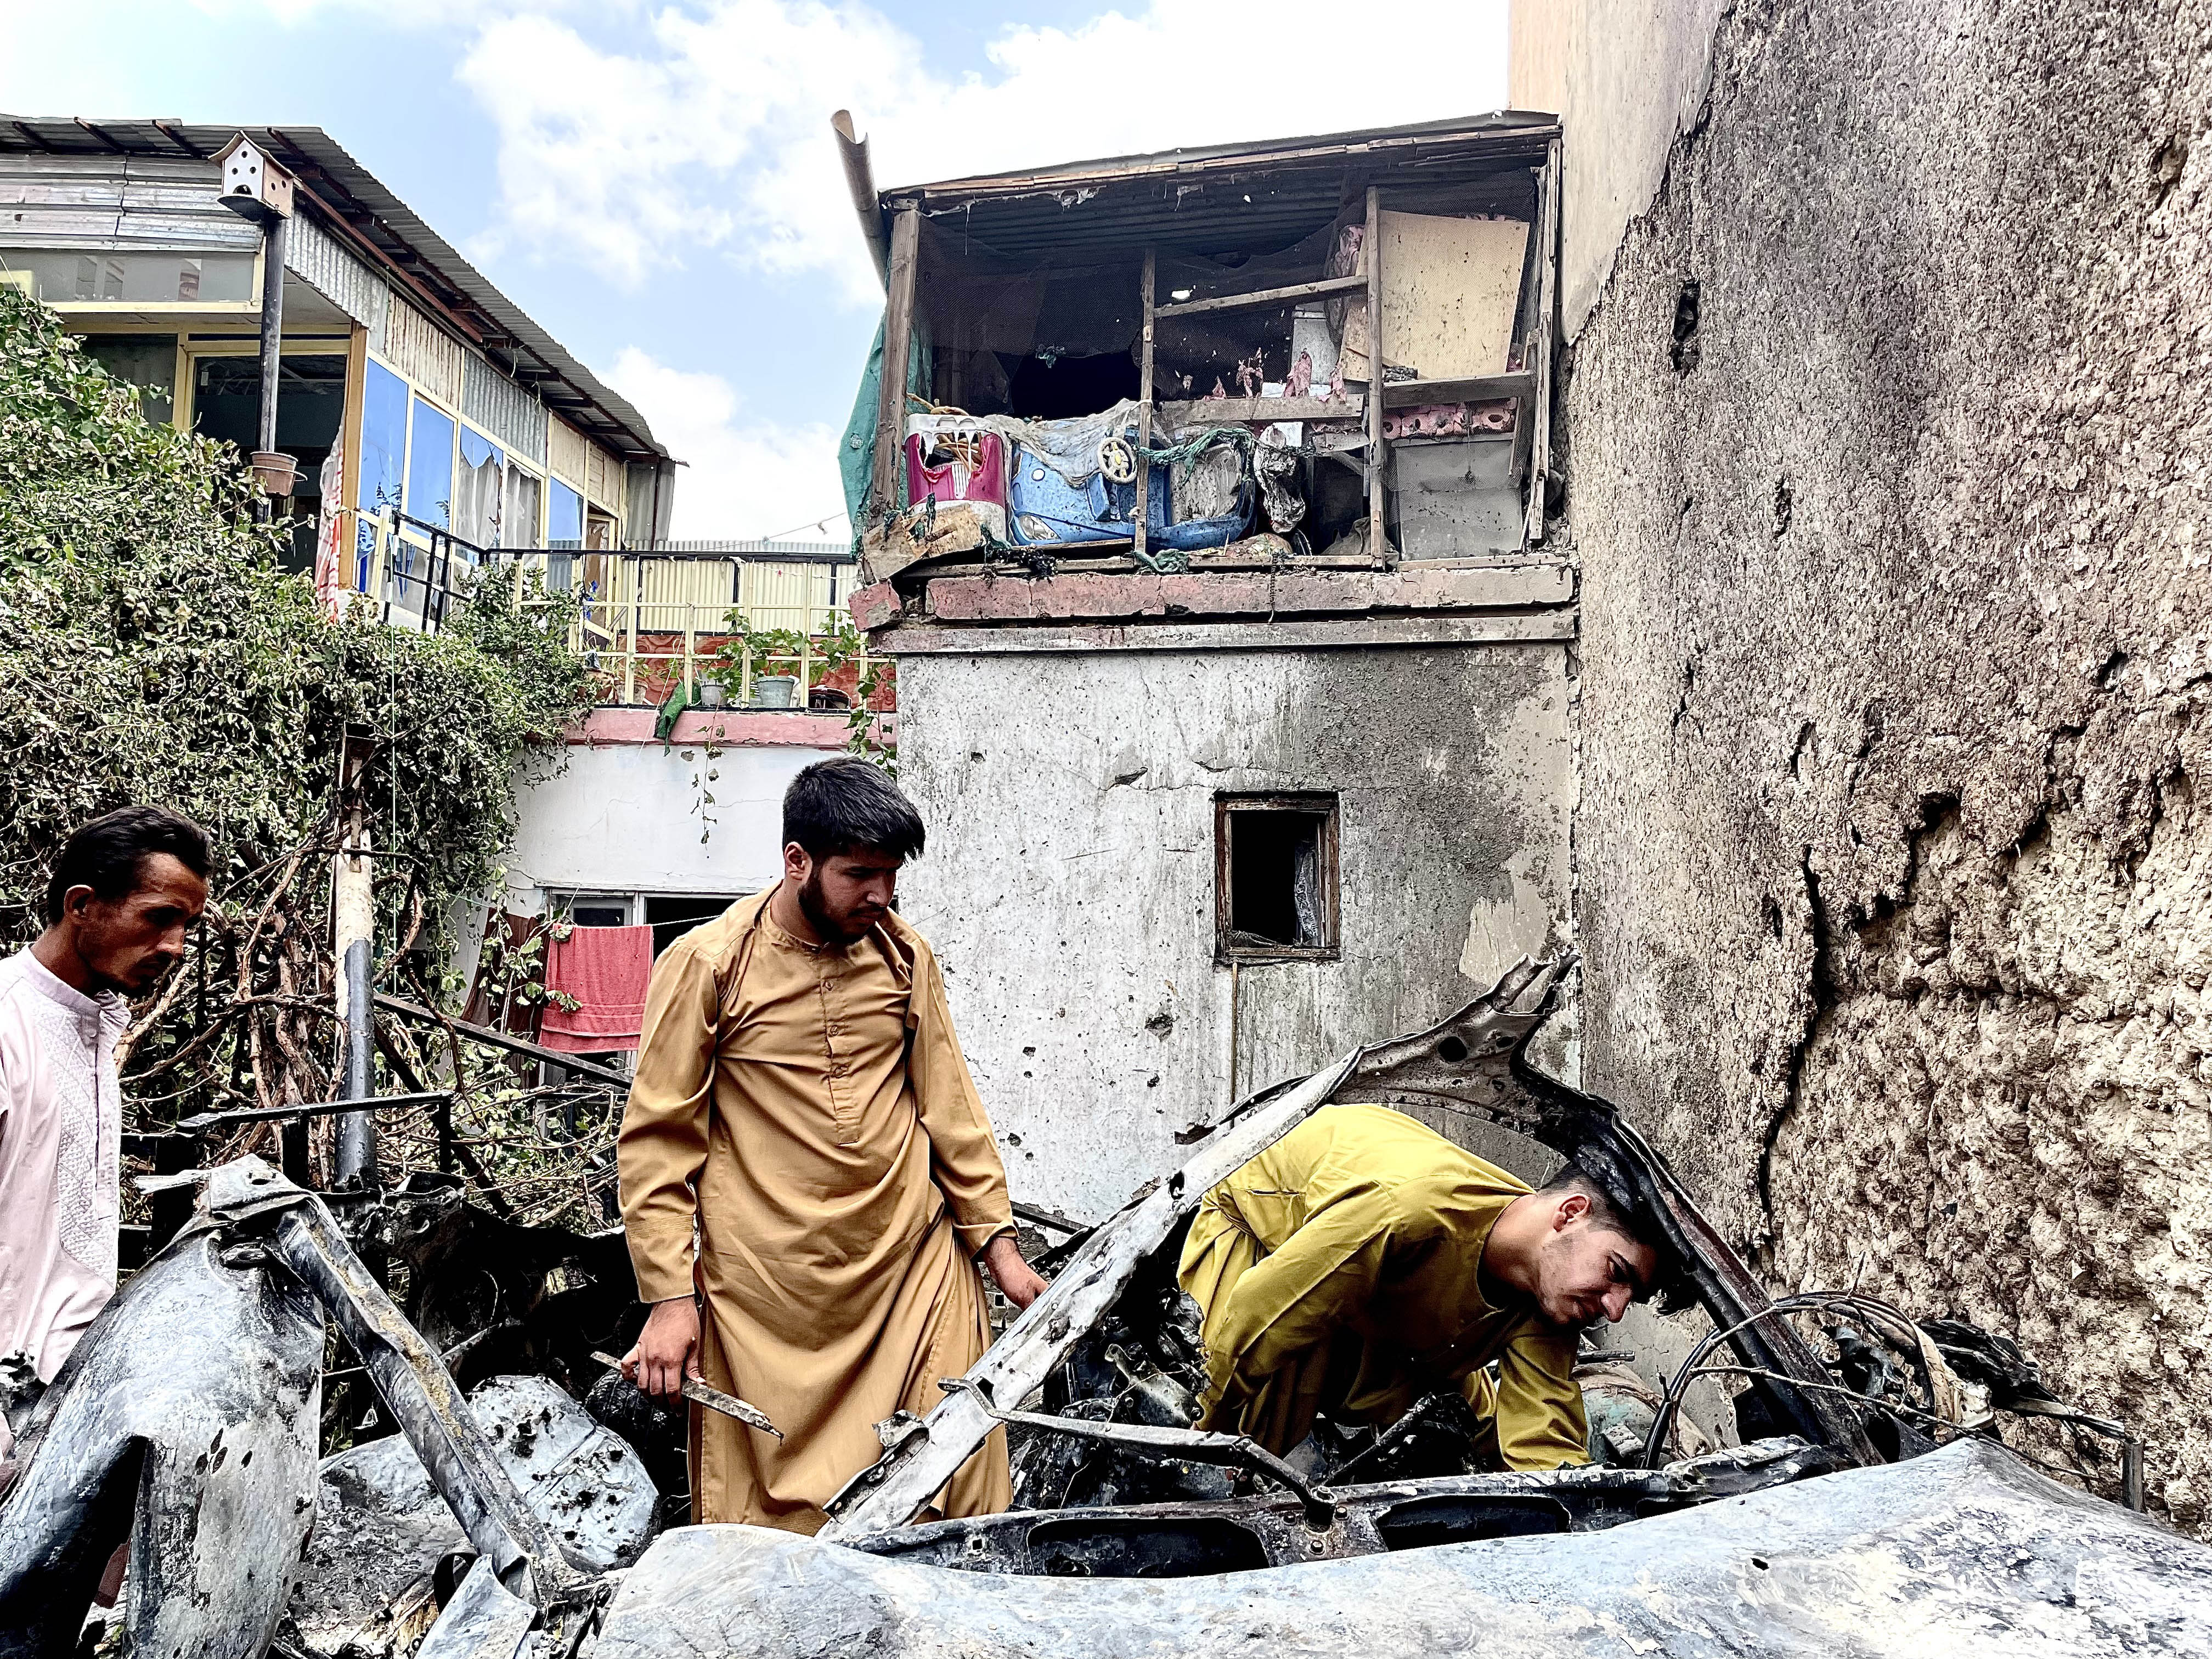 Men search the car hit by a US drone strike in Kabul on Aug. 29, 2021.